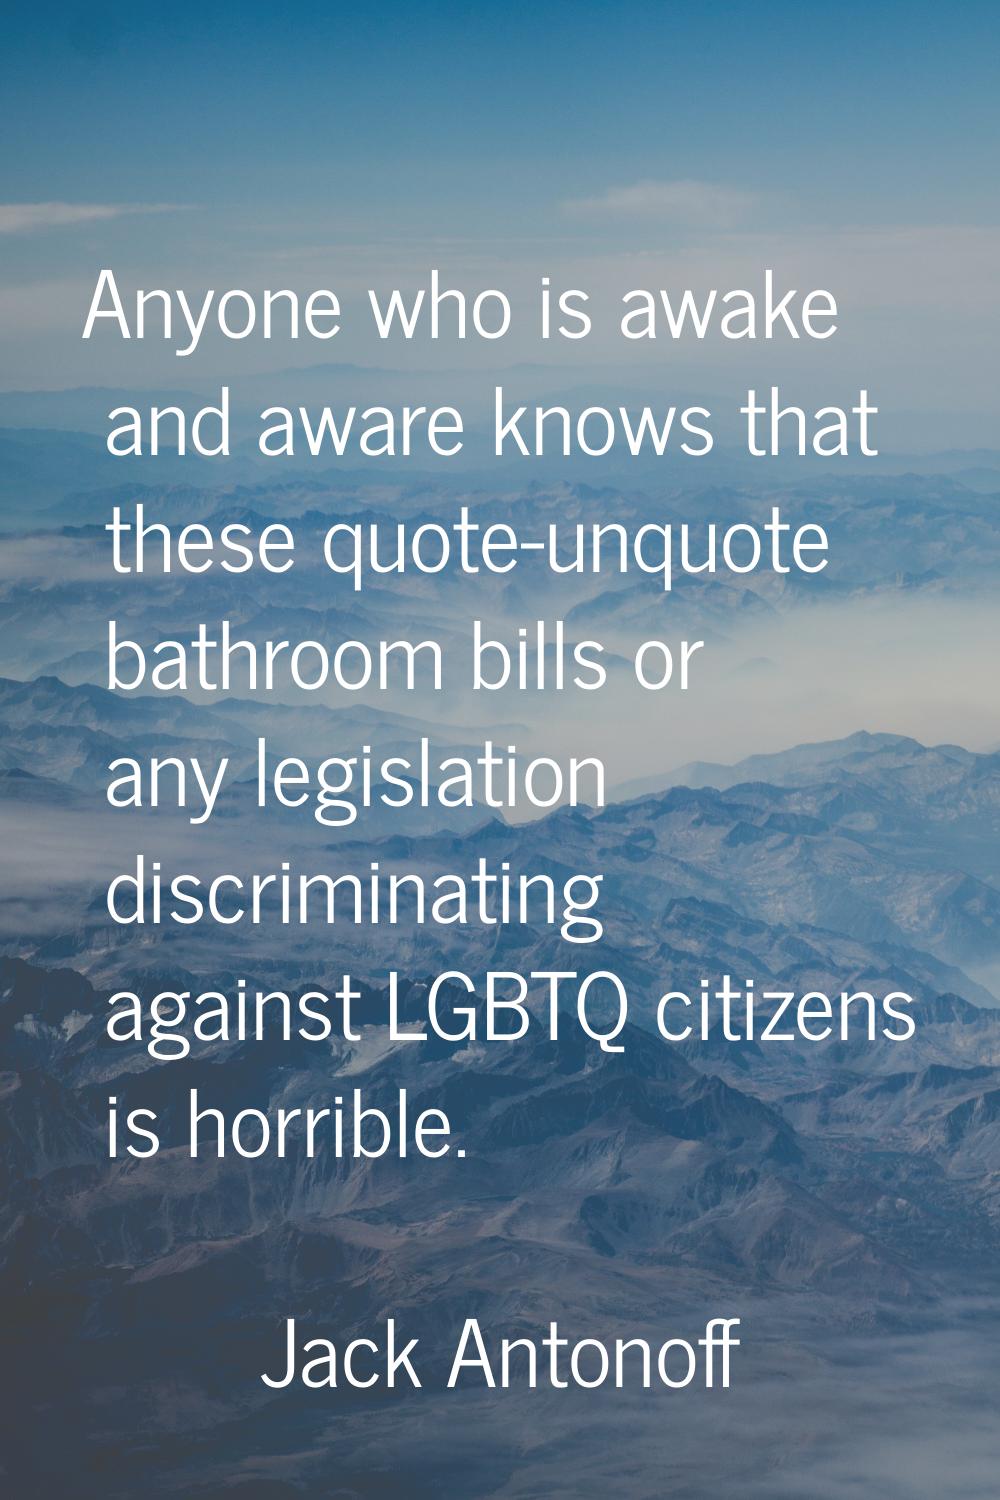 Anyone who is awake and aware knows that these quote-unquote bathroom bills or any legislation disc